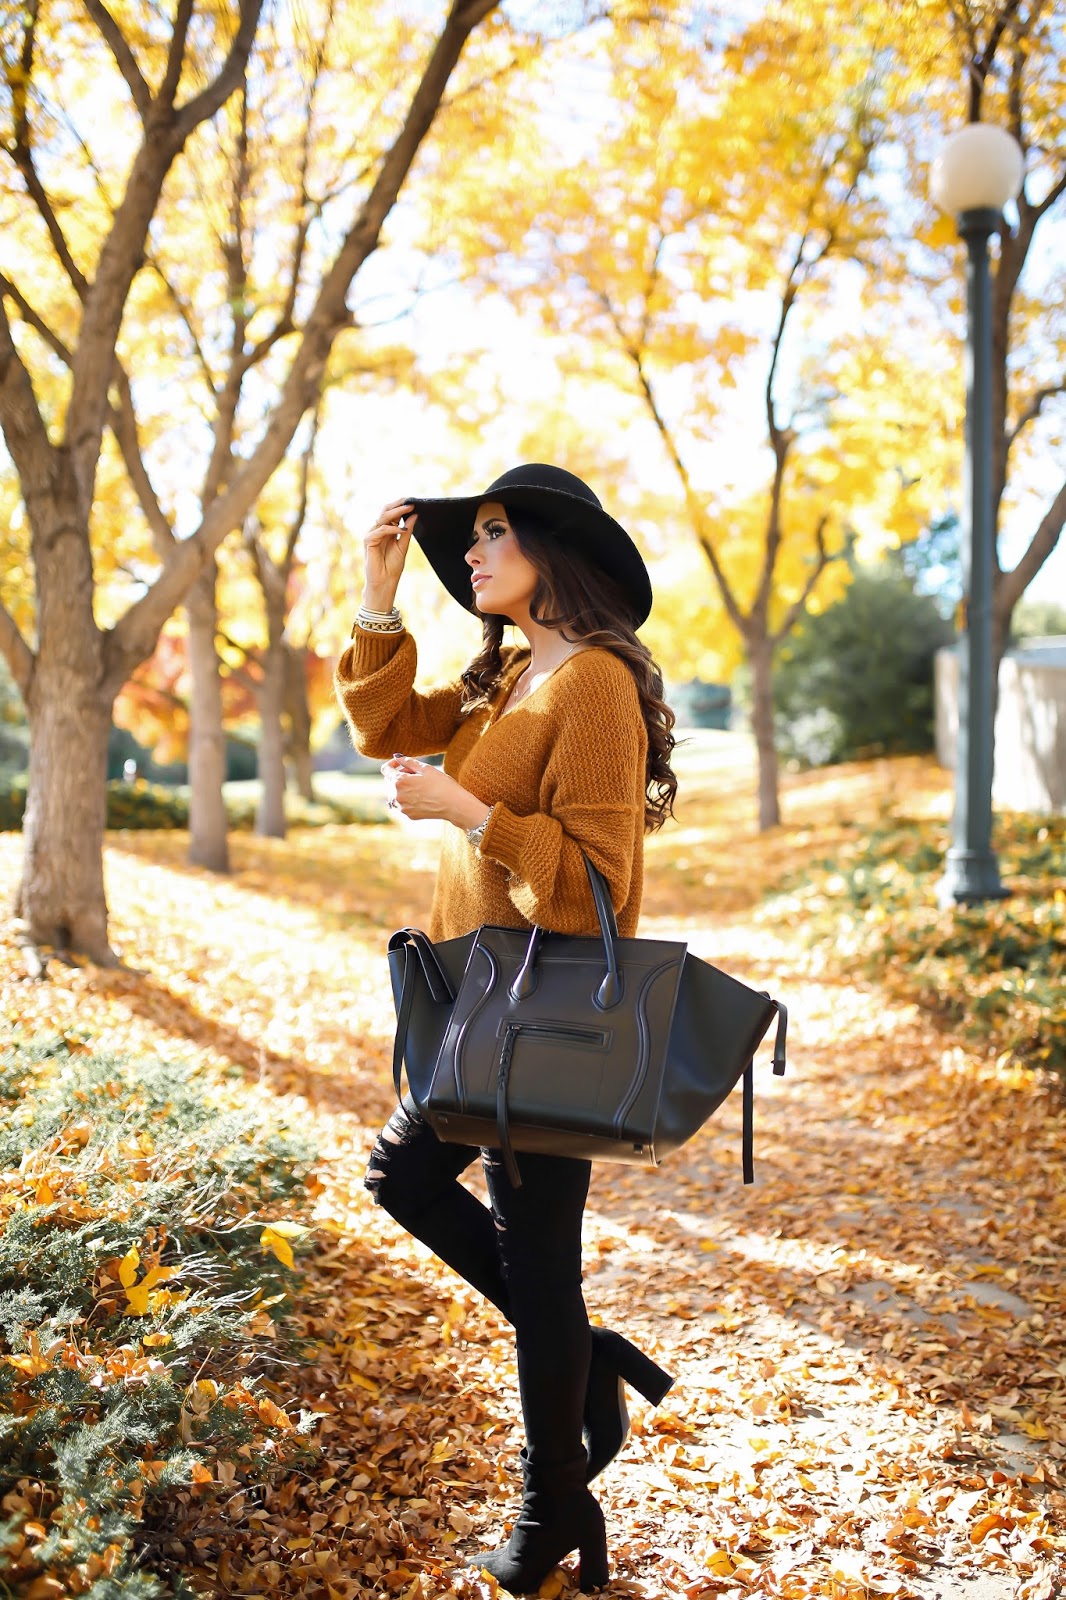 emily gemma, the sweetest thing blog, Fall outfit inspiration 2016, pinterest fall outfit, pinterest fall fashion 2016, pinterest outfits sweaters and floppy hats, how to style floppy hat for fall, best floppy hat for fall, pinterest fall outfits with ripped jeans and sweaters, black celine phantom, Free people sweater, AG jeans black distressed, BCBG booties, black steve madden booties, fall ootd, top fall fashion blogs, denver travel blog, 